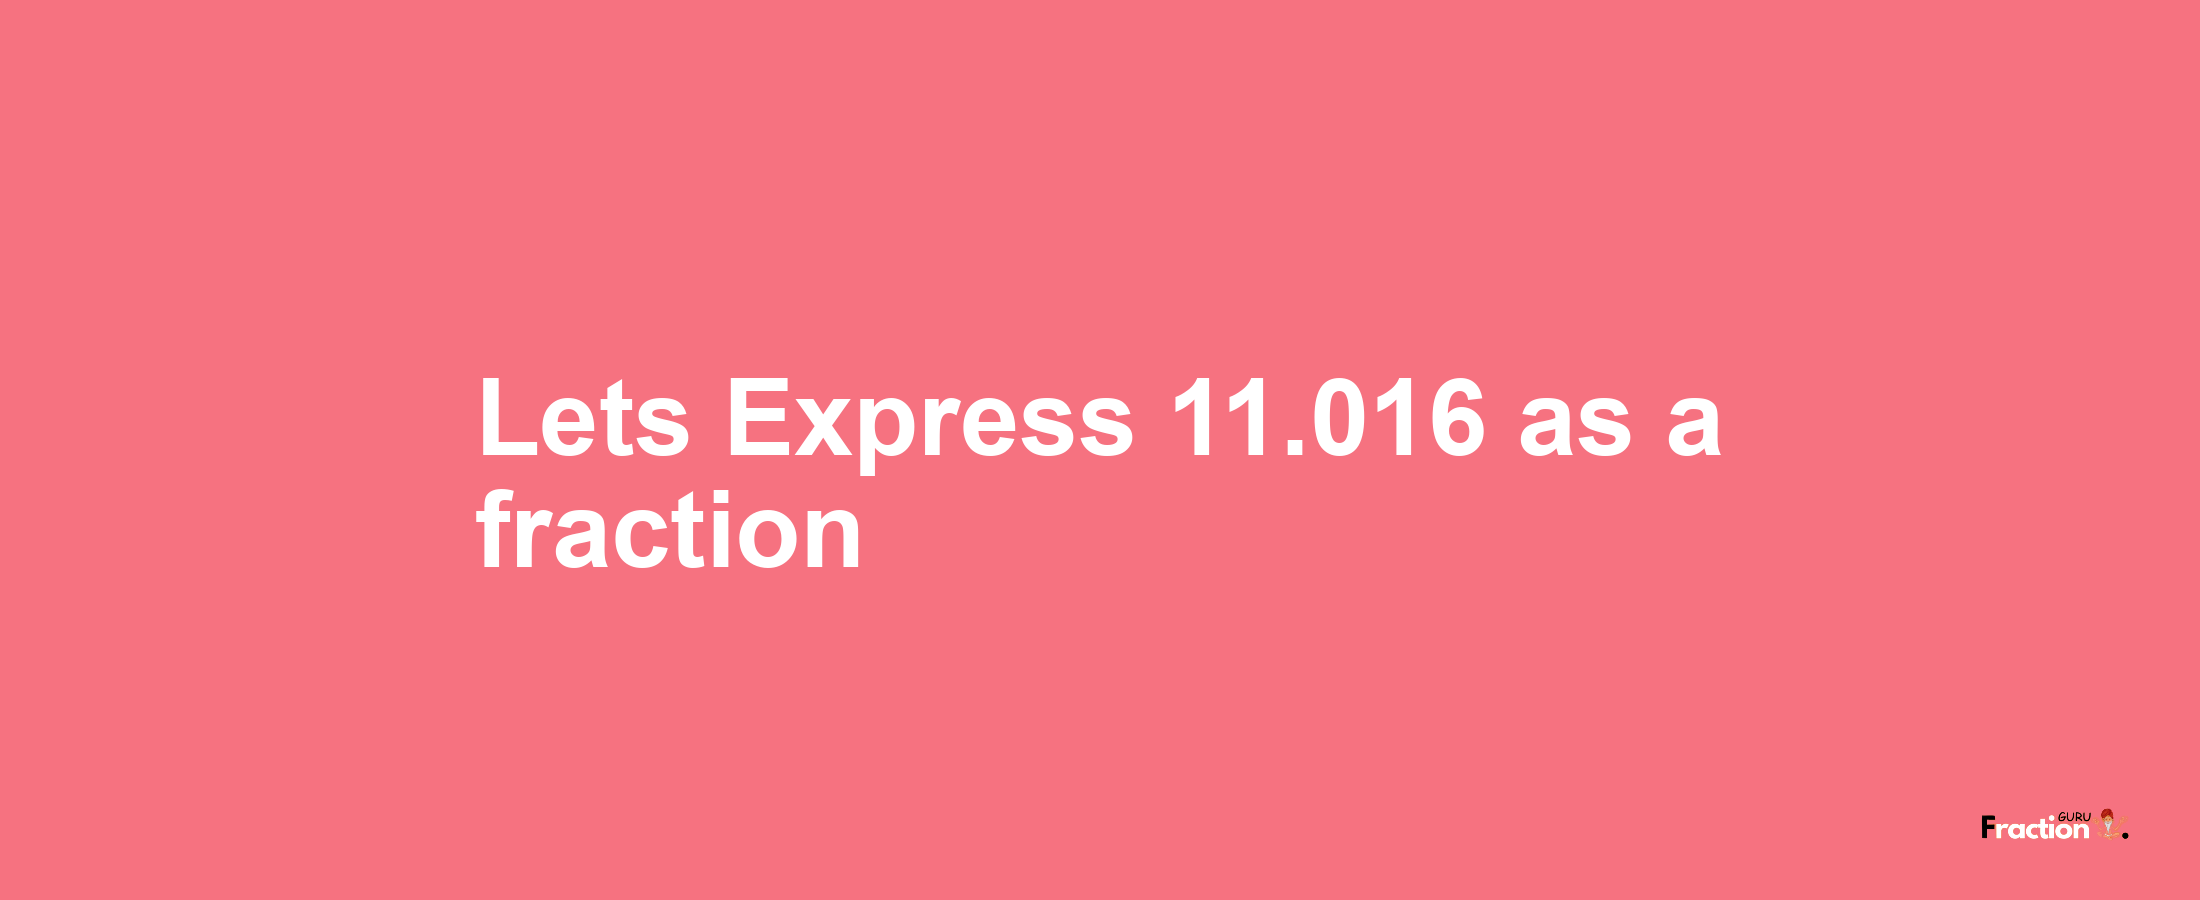 Lets Express 11.016 as afraction